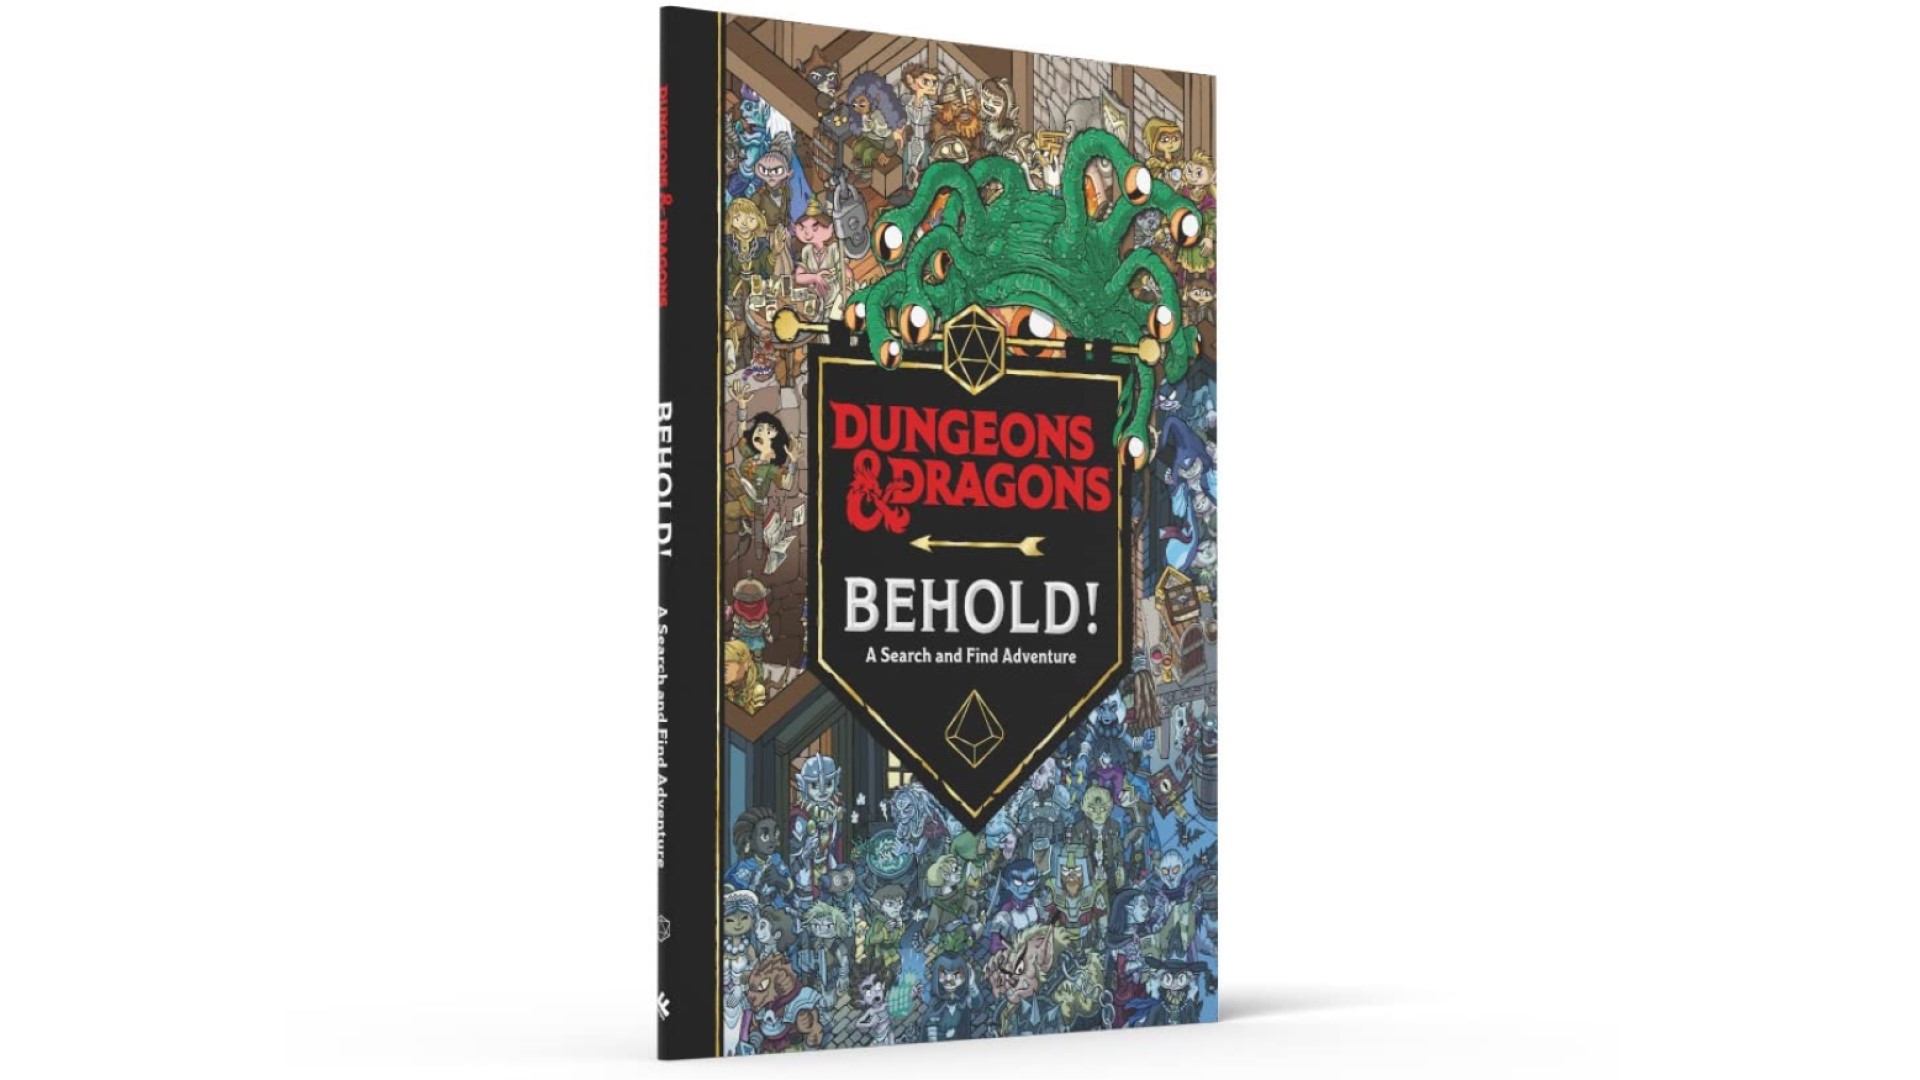 DnD gifts - book cover of Dungeons and Dragons Behold!